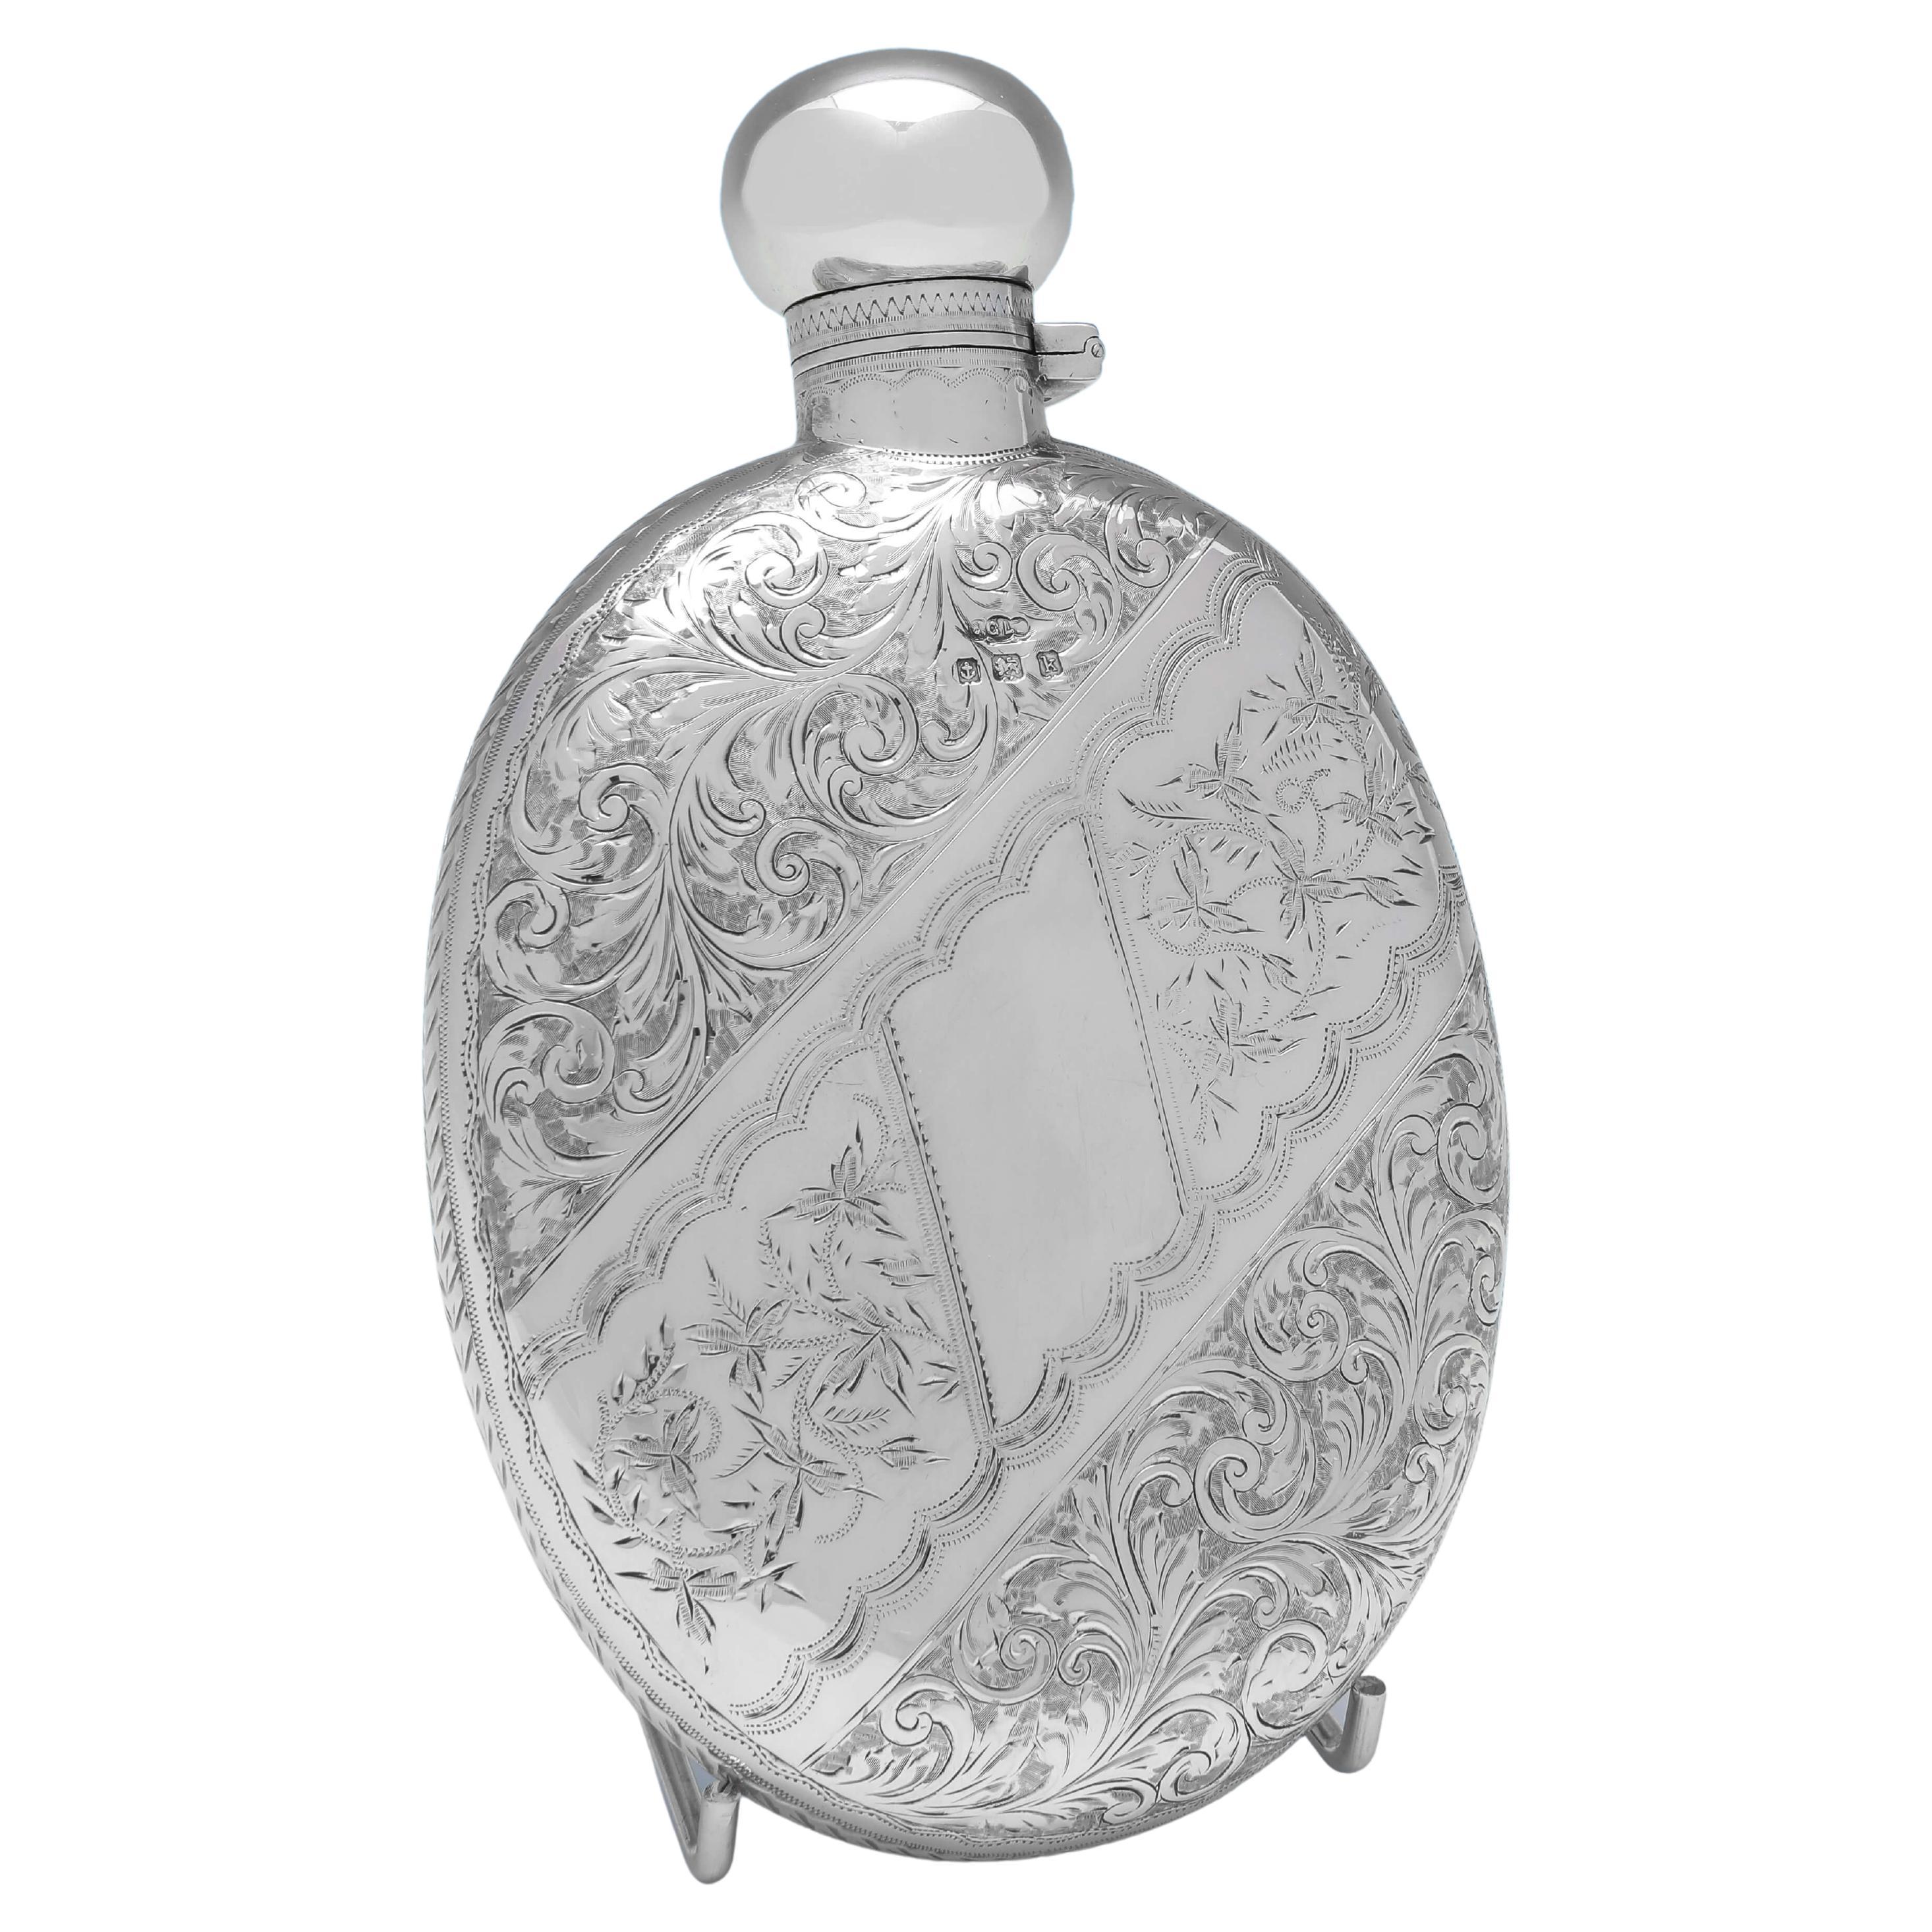 Stunning Engraved Antique Sterling Silver Hip Flask, Joseph Gloster, 1909